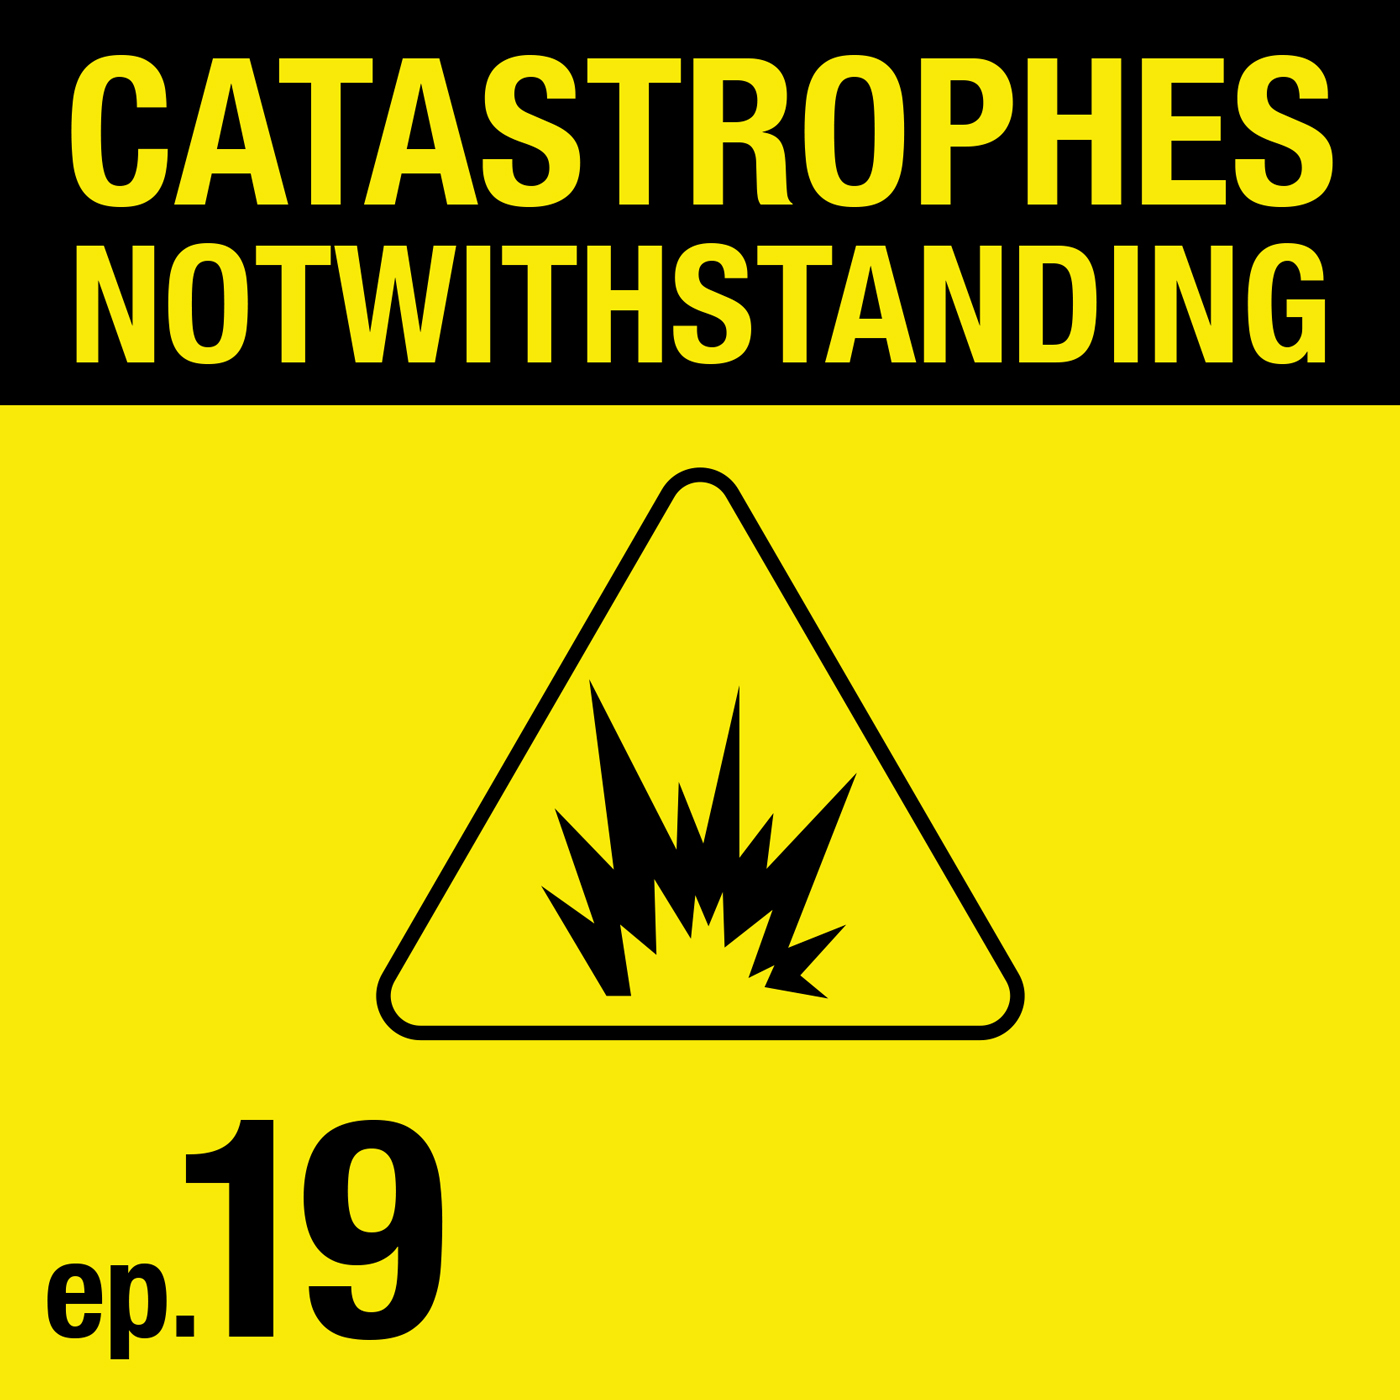 Cover Image of Catastrophes Notwithstanding Episode 19